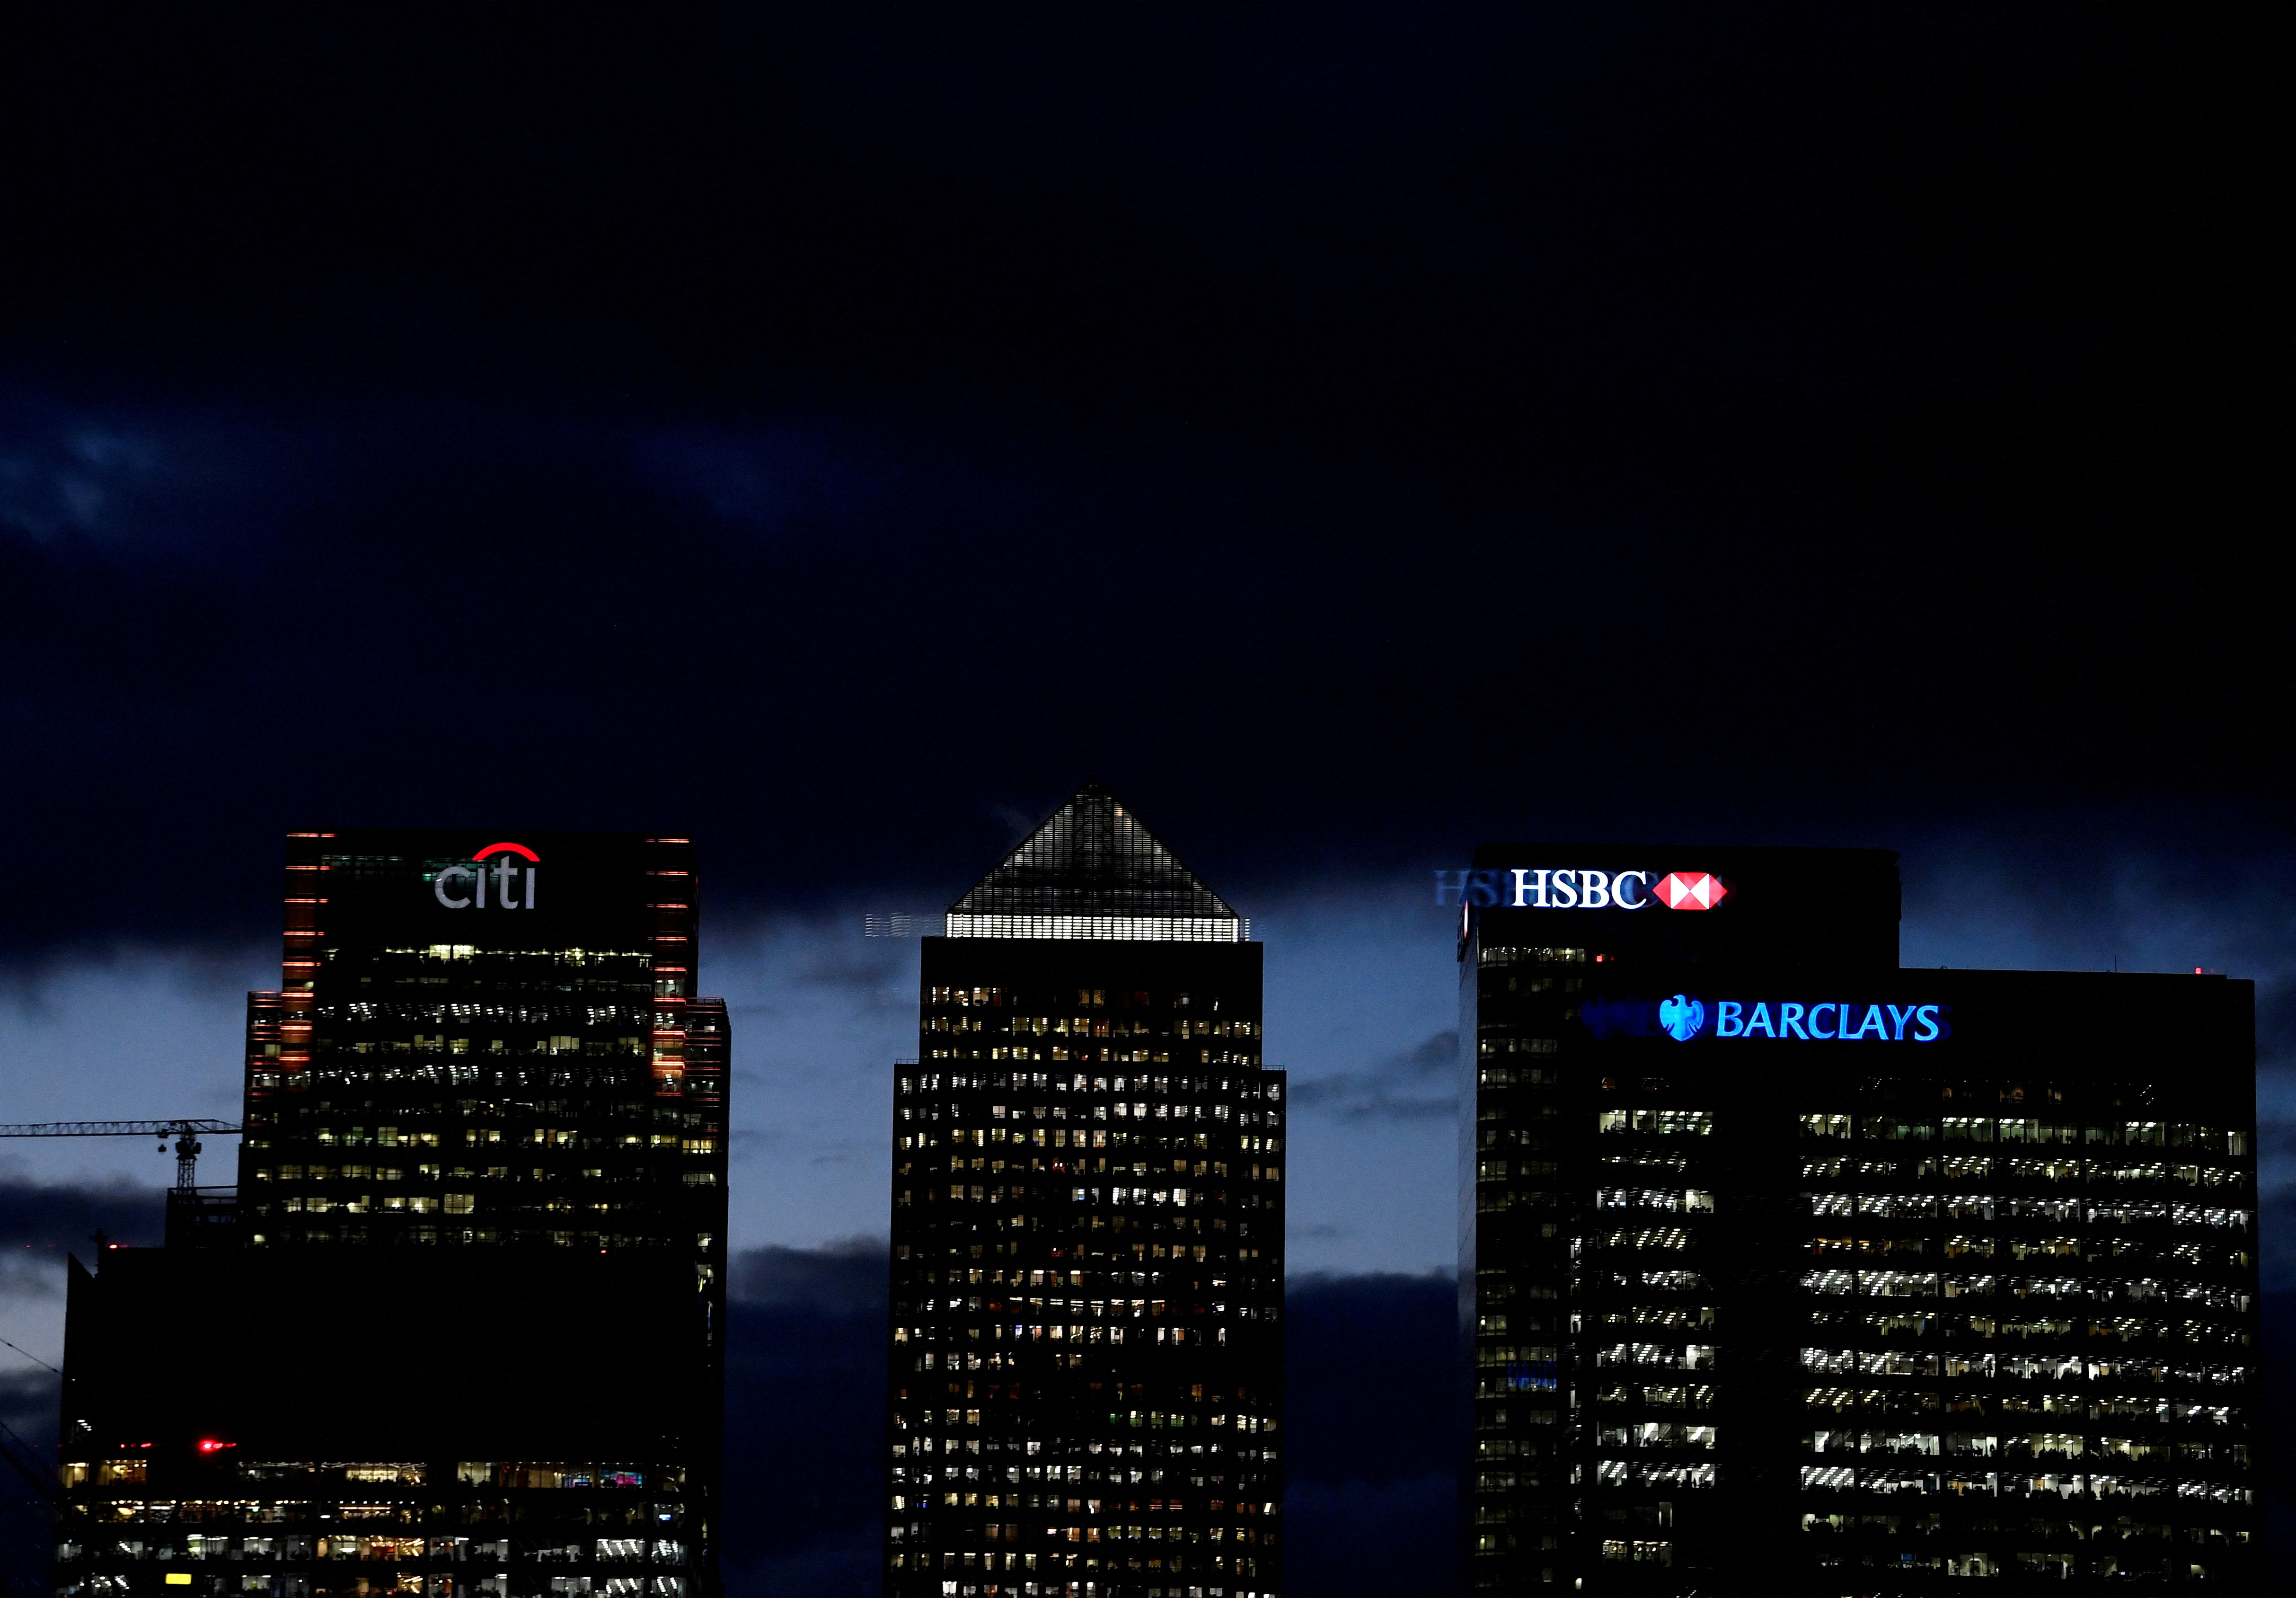 Citibank, HSBC and Barclay's buildings are lit up at dusk in the Canary Wharf financial district of London